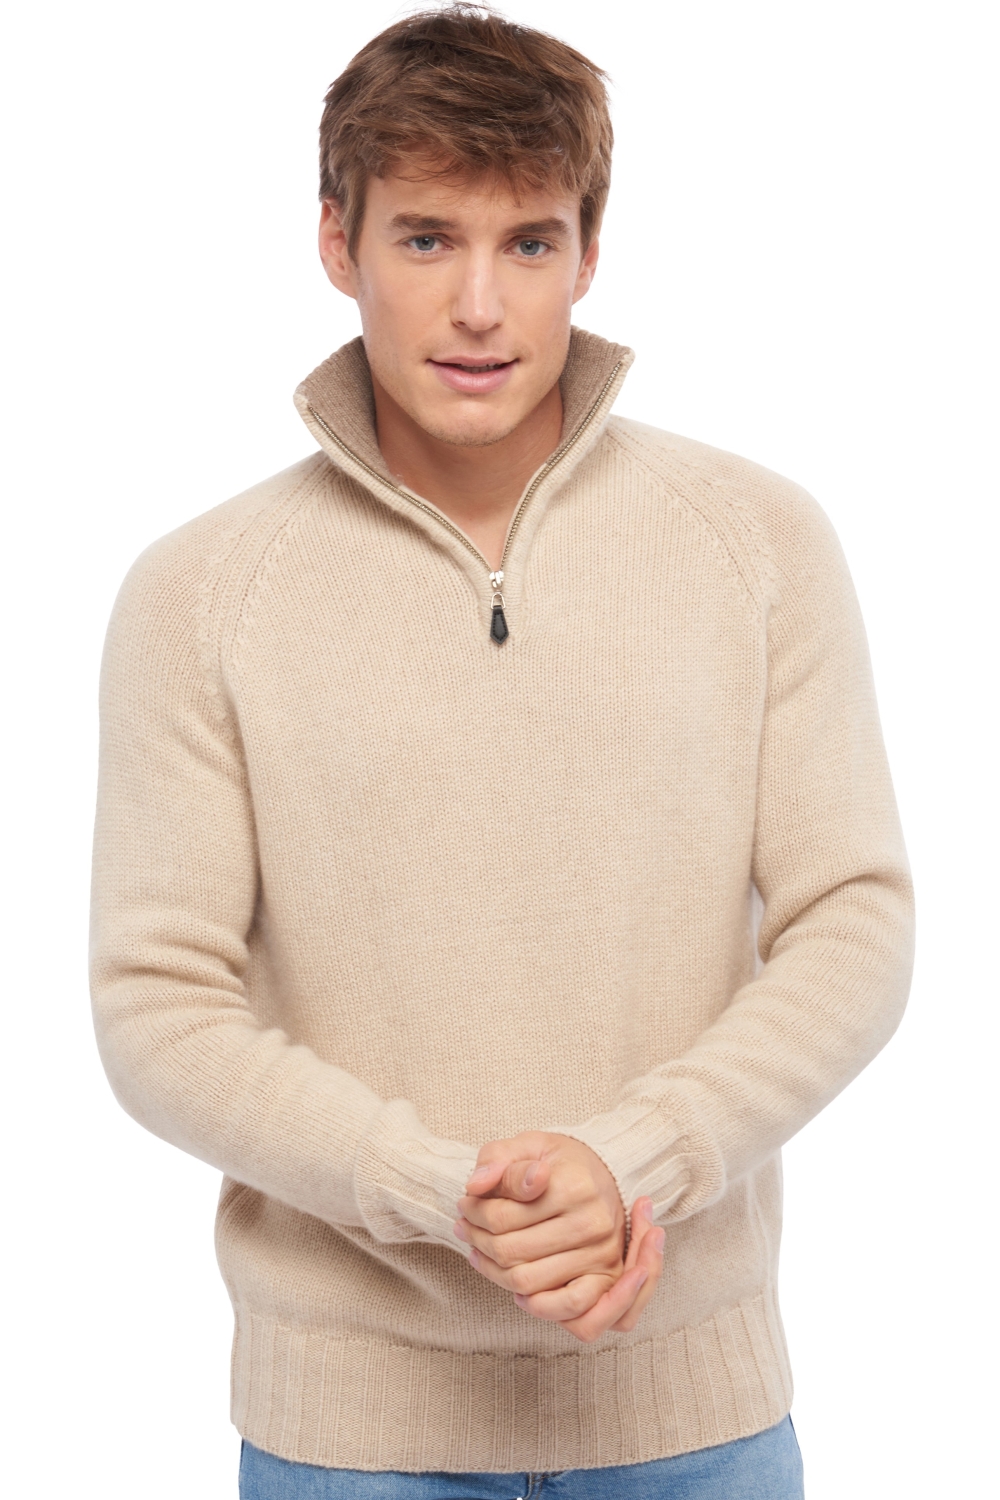 Cashmere men polo style sweaters olivier natural beige natural brown m